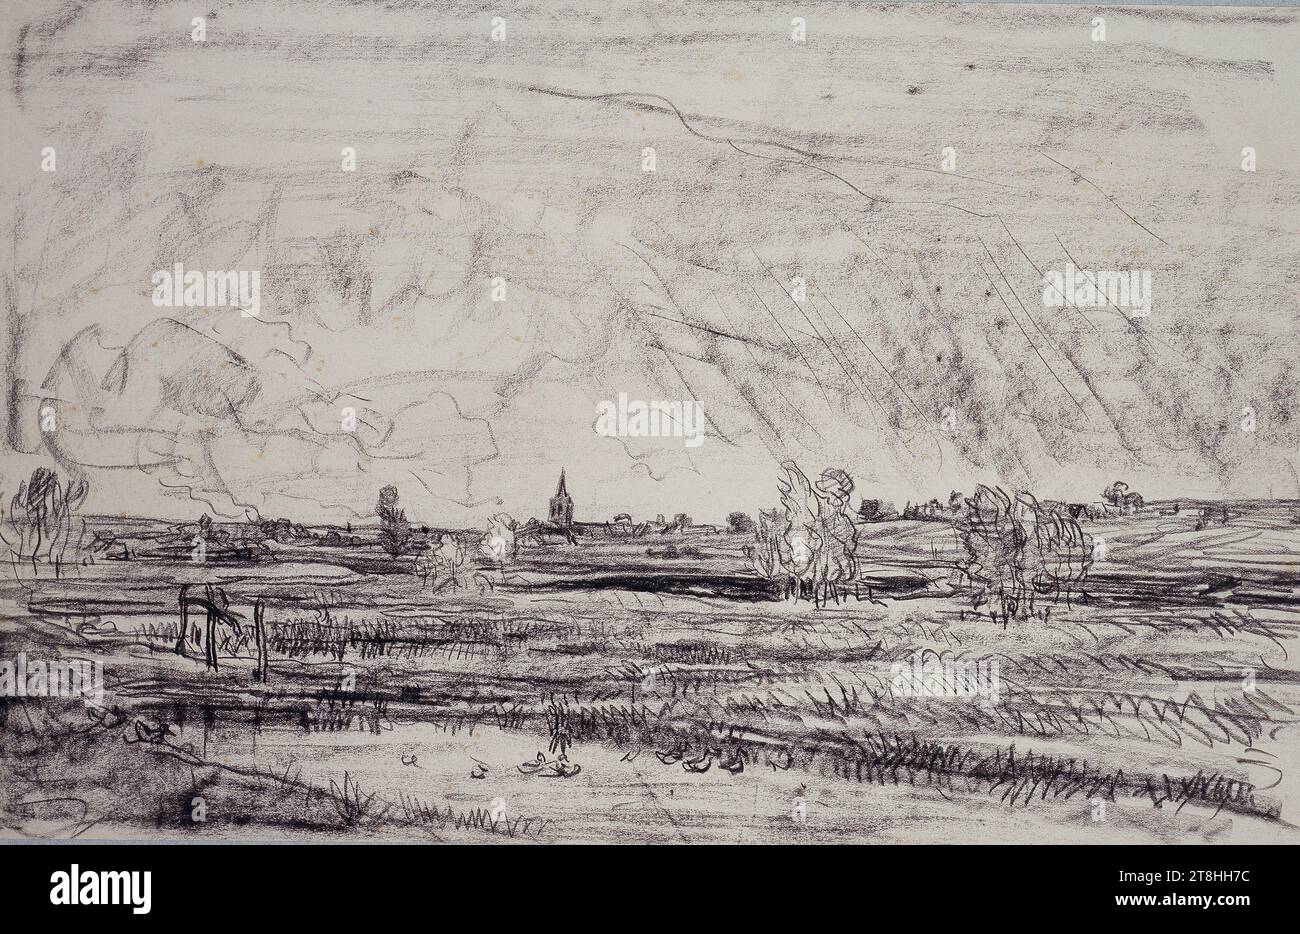 Attributed to CHARLES FRANÇOIS DAUBIGNY, Flat landscape with a church tower in rainy weather, 1860 - 1878, sheet, 280 x 440 mm, charcoal and black chalk on vellum paper, Flat landscape with a church tower in rainy weather, attributed to CHARLES FRANÇOIS DAUBIGNY, 19TH CENTURY, DRAWING, charcoal and black chalk on vellum paper, CHARCOAL, CHALK, VELVET PAPER, CHARCOAL DRAWING, CHALK DRAWING, FRENCH, LANDSCAPE STUDY Stock Photo